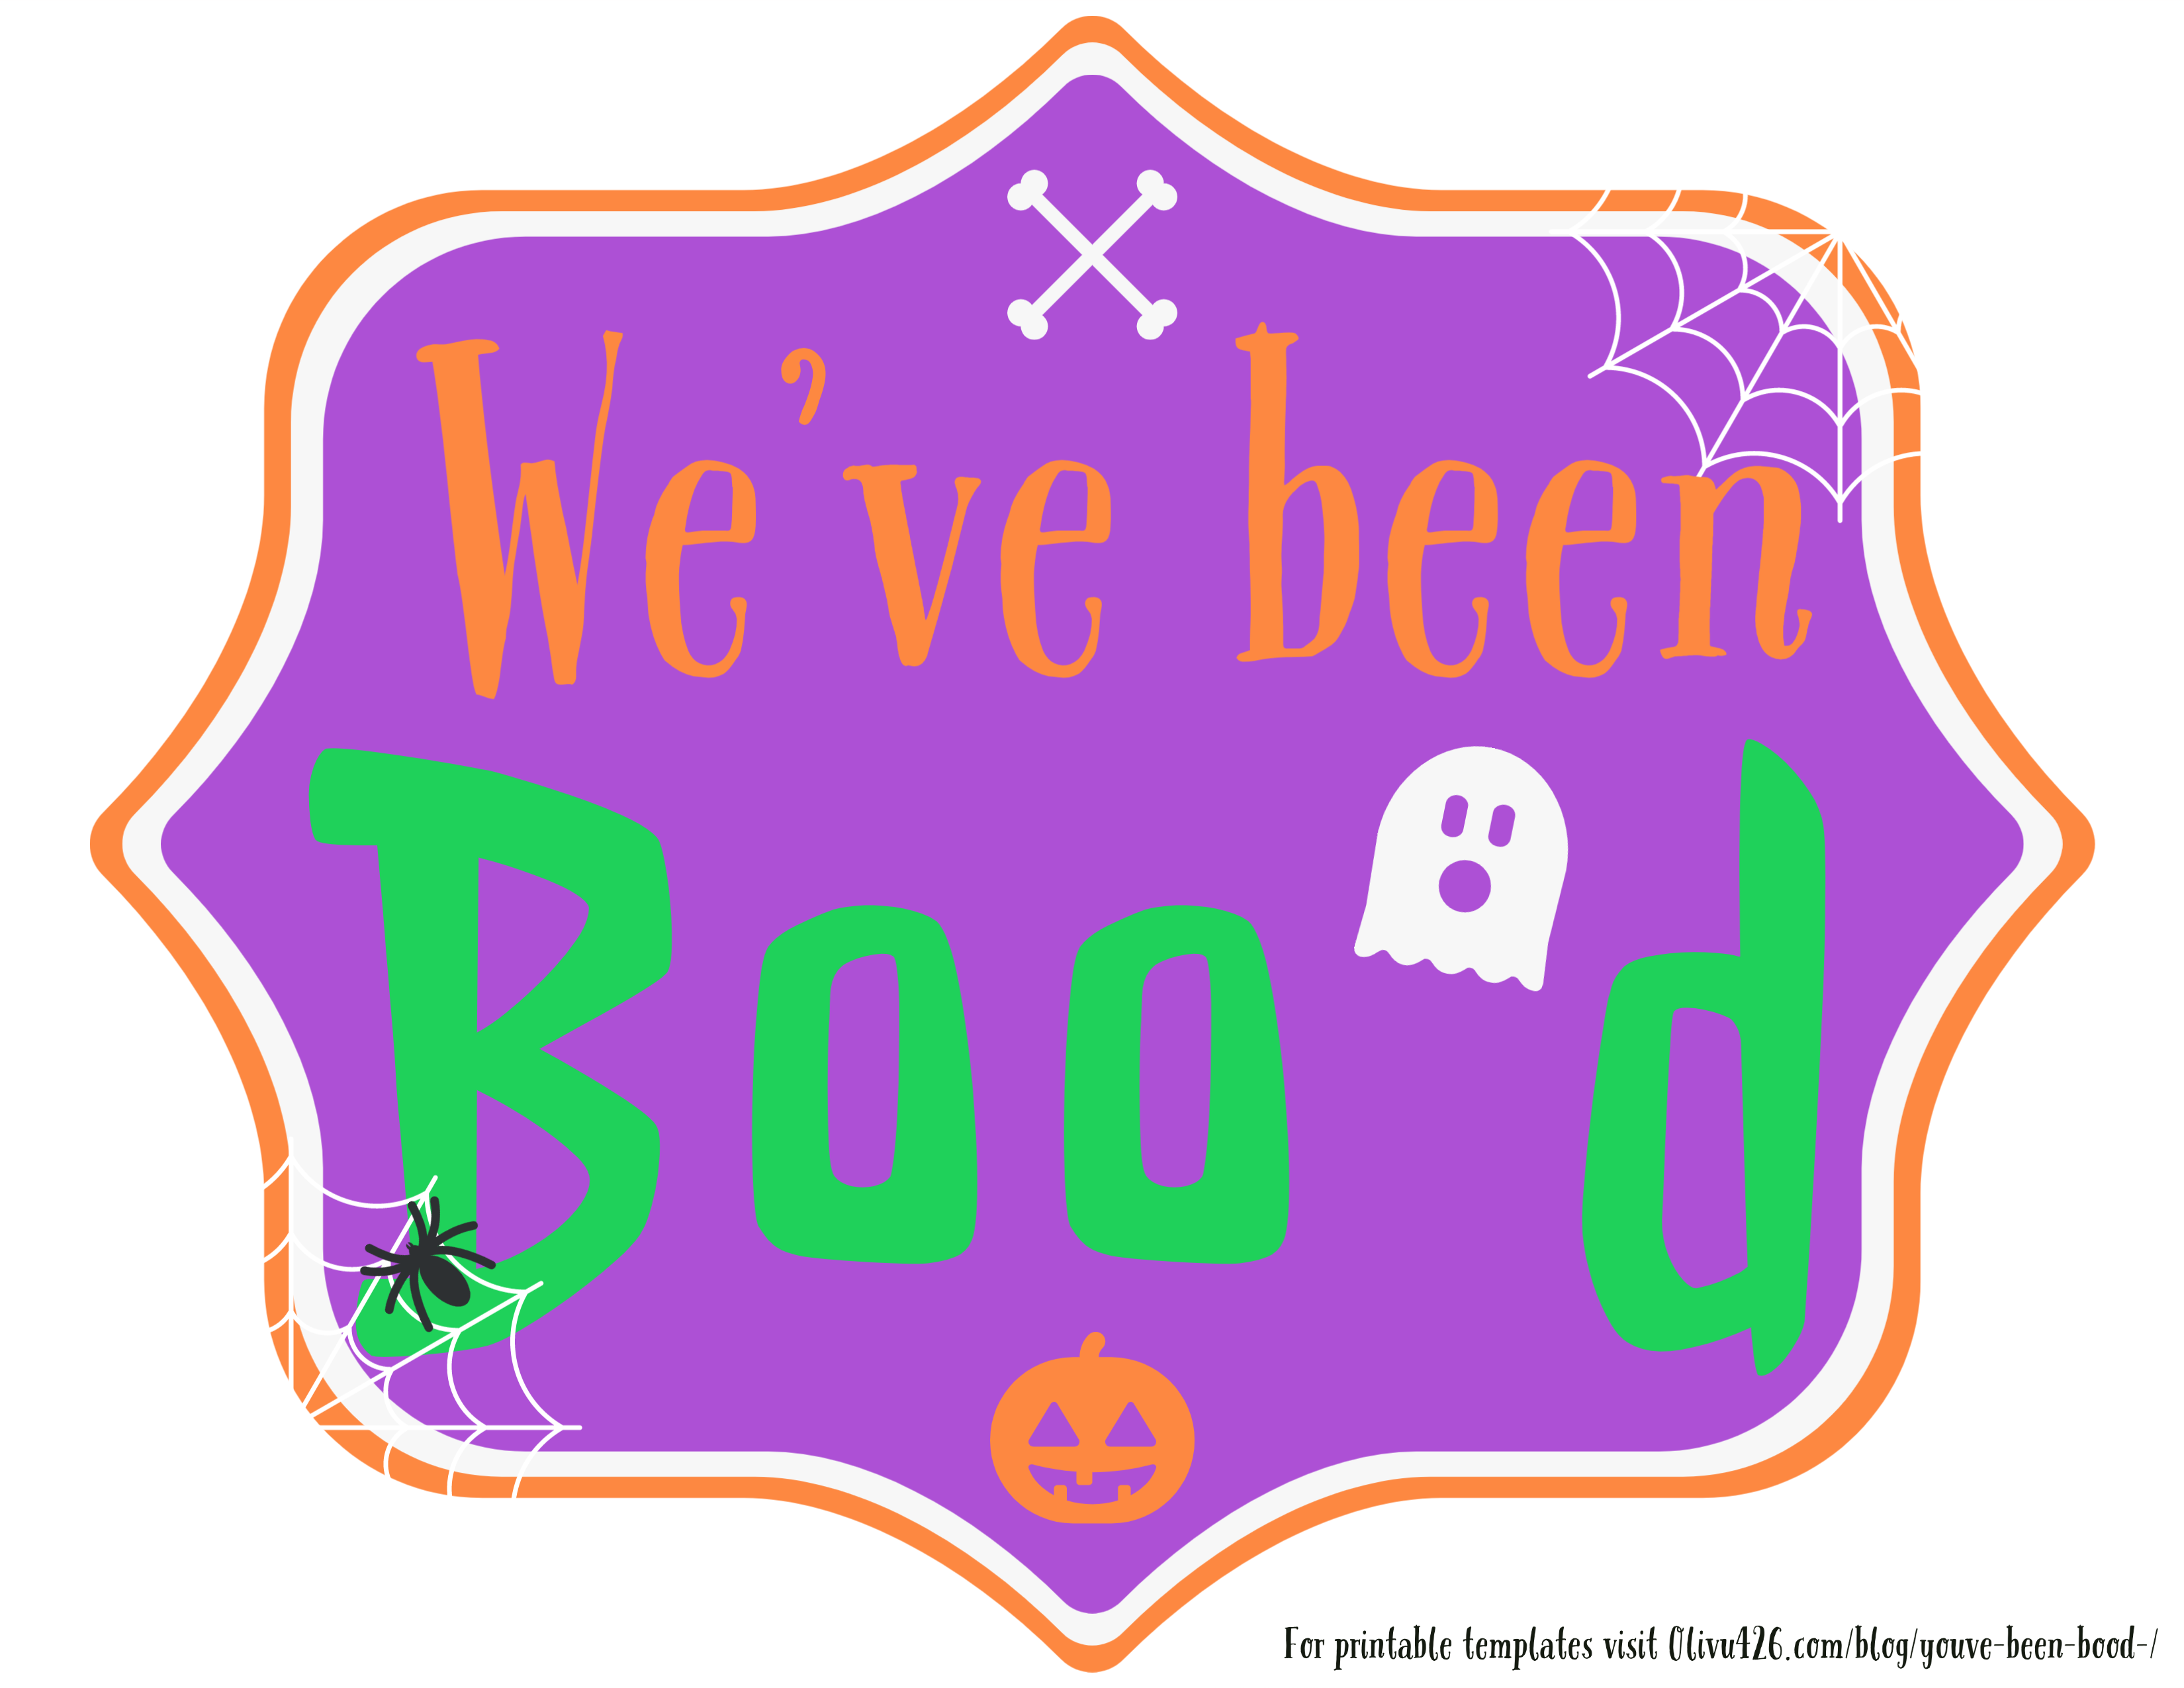 You've Been Boo'd! - Olivu 426